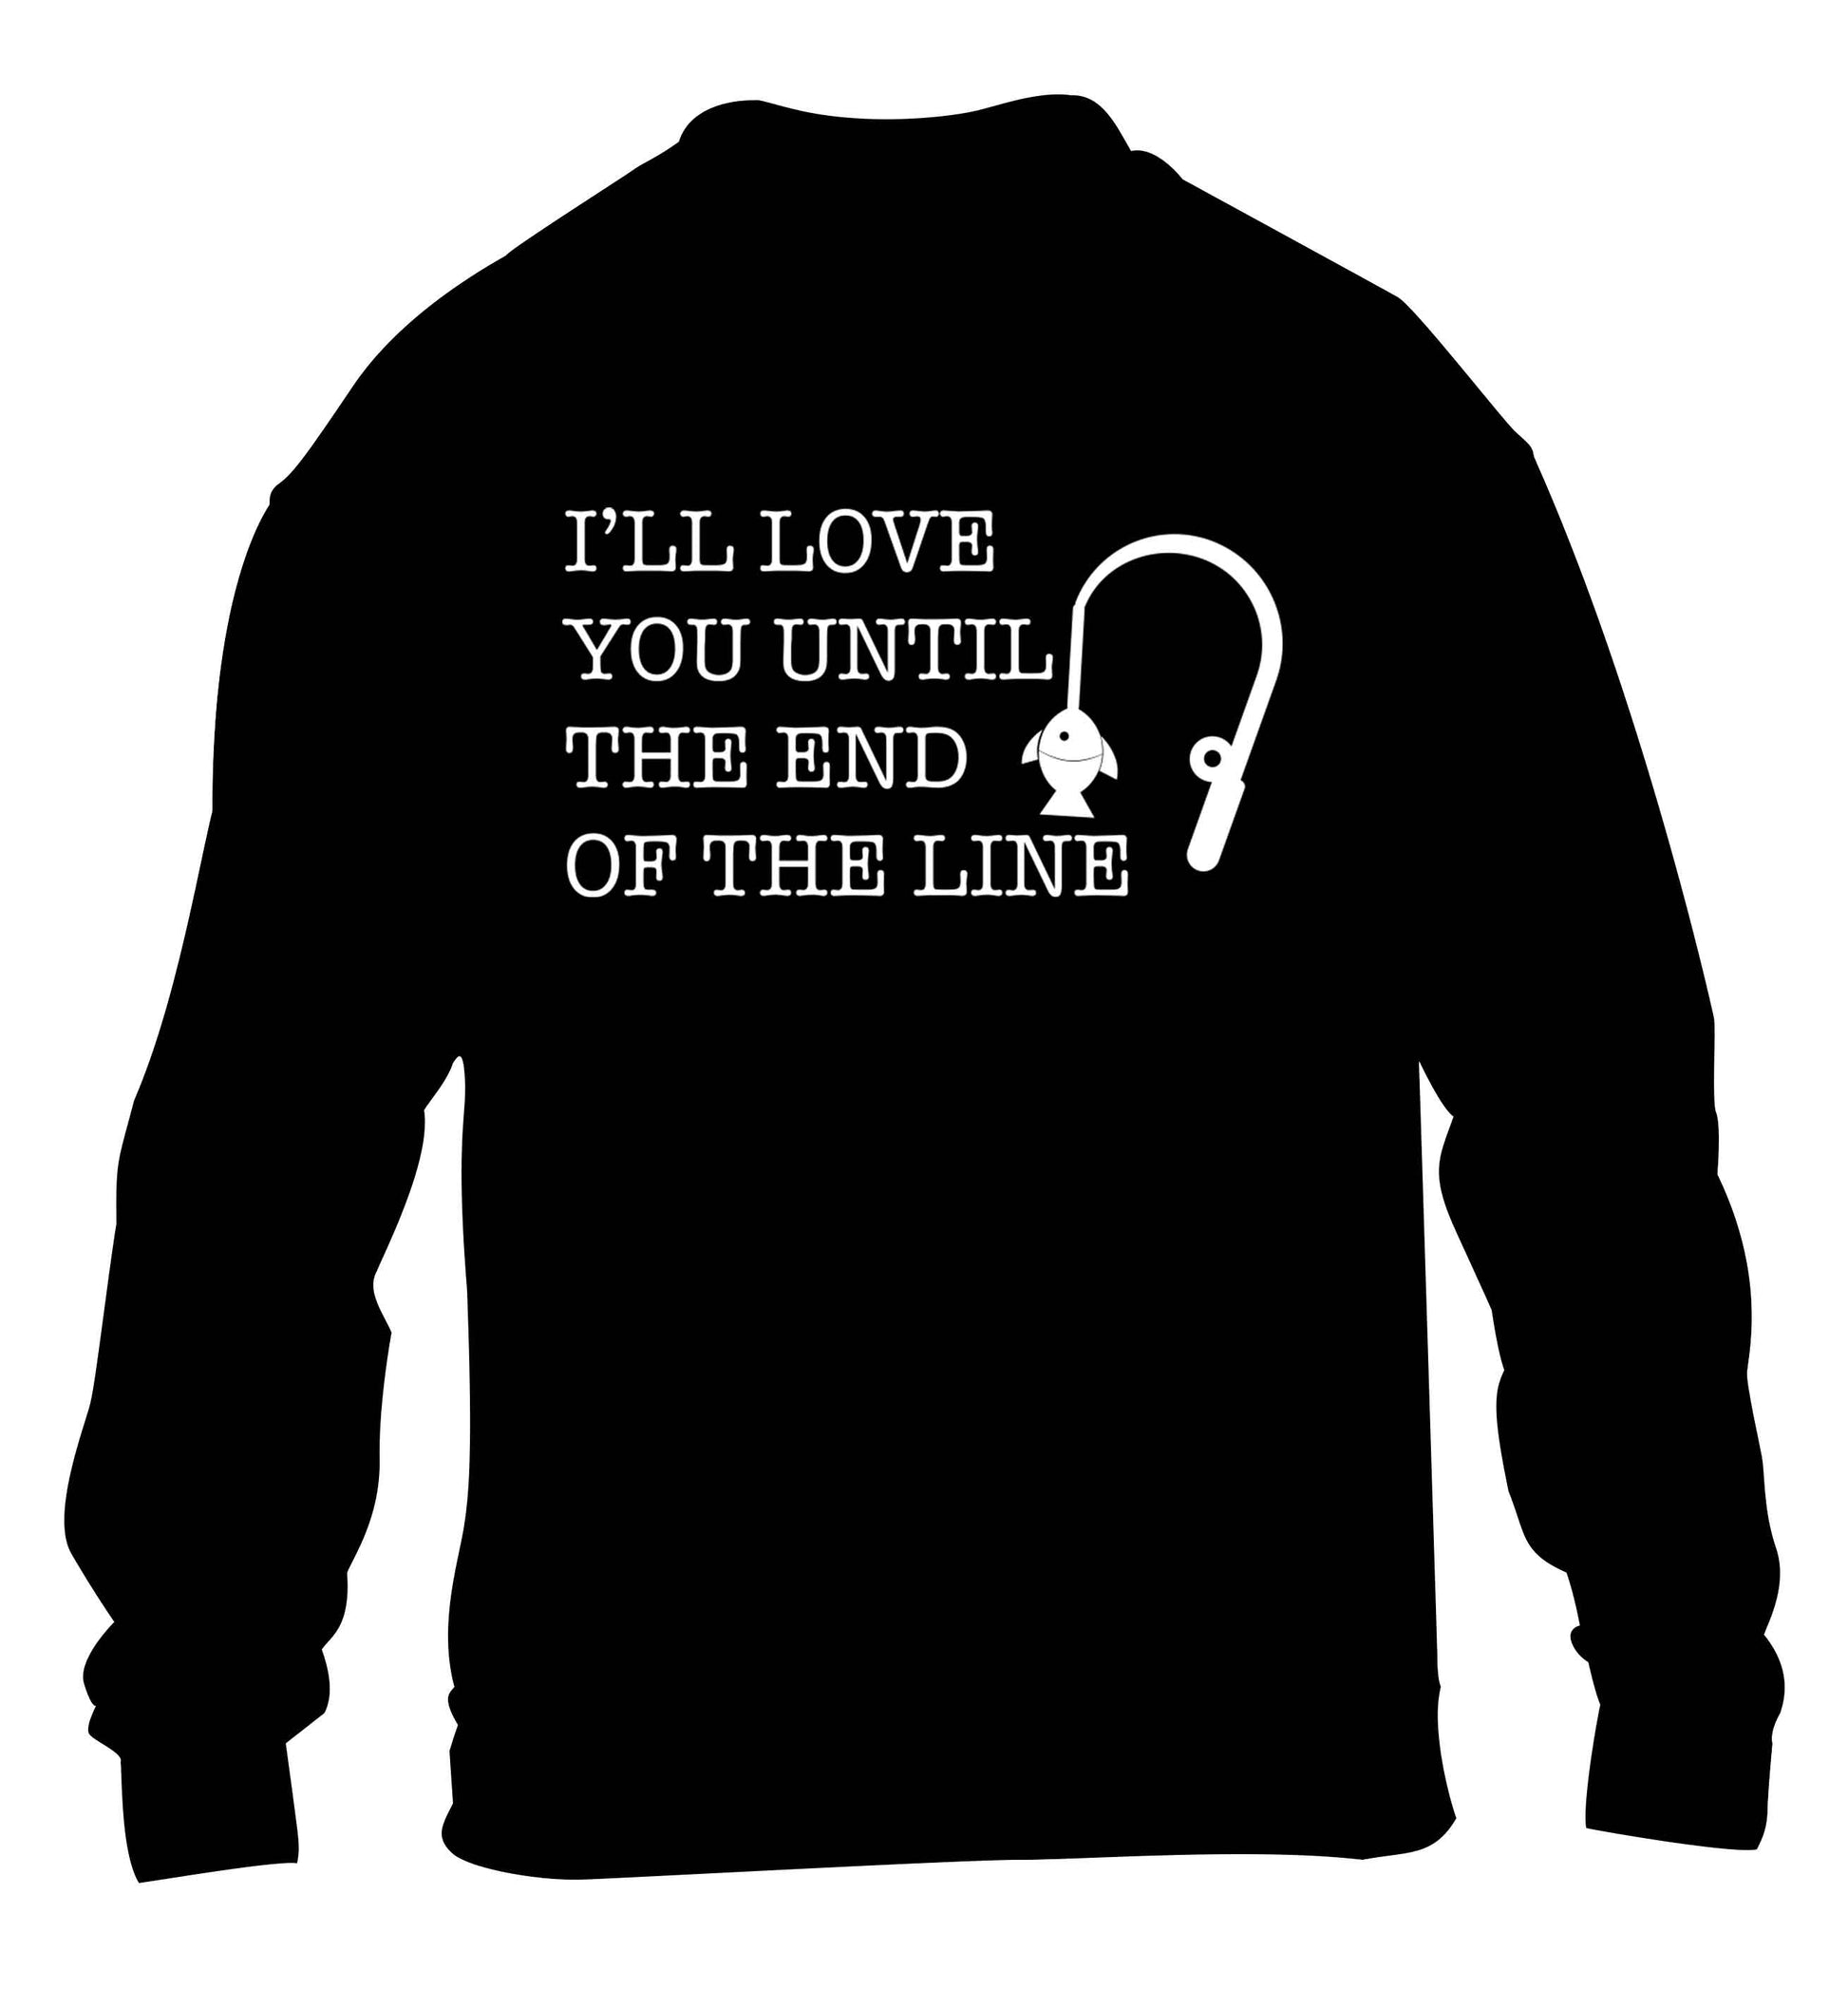 I'll love you until the end of the line children's black sweater 12-13 Years